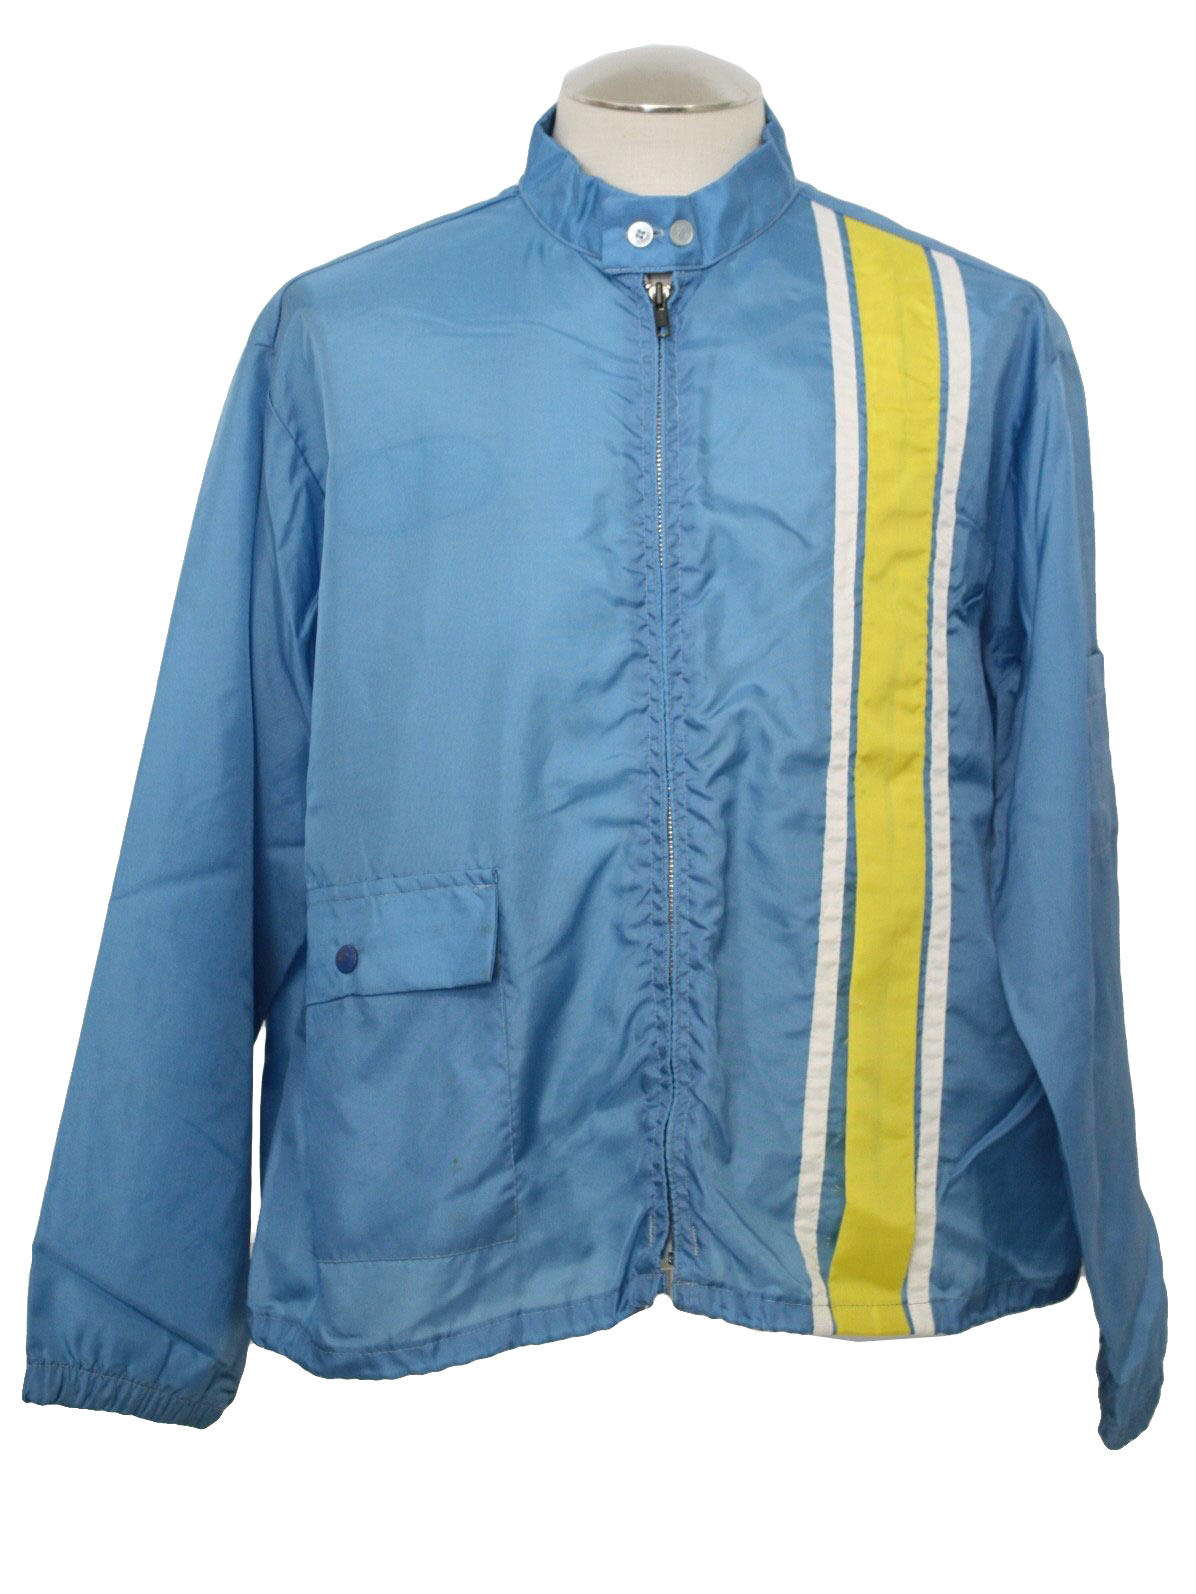 1970s Swingster Jacket: 70s -Swingster- Mens sky blue, yellow and white ...